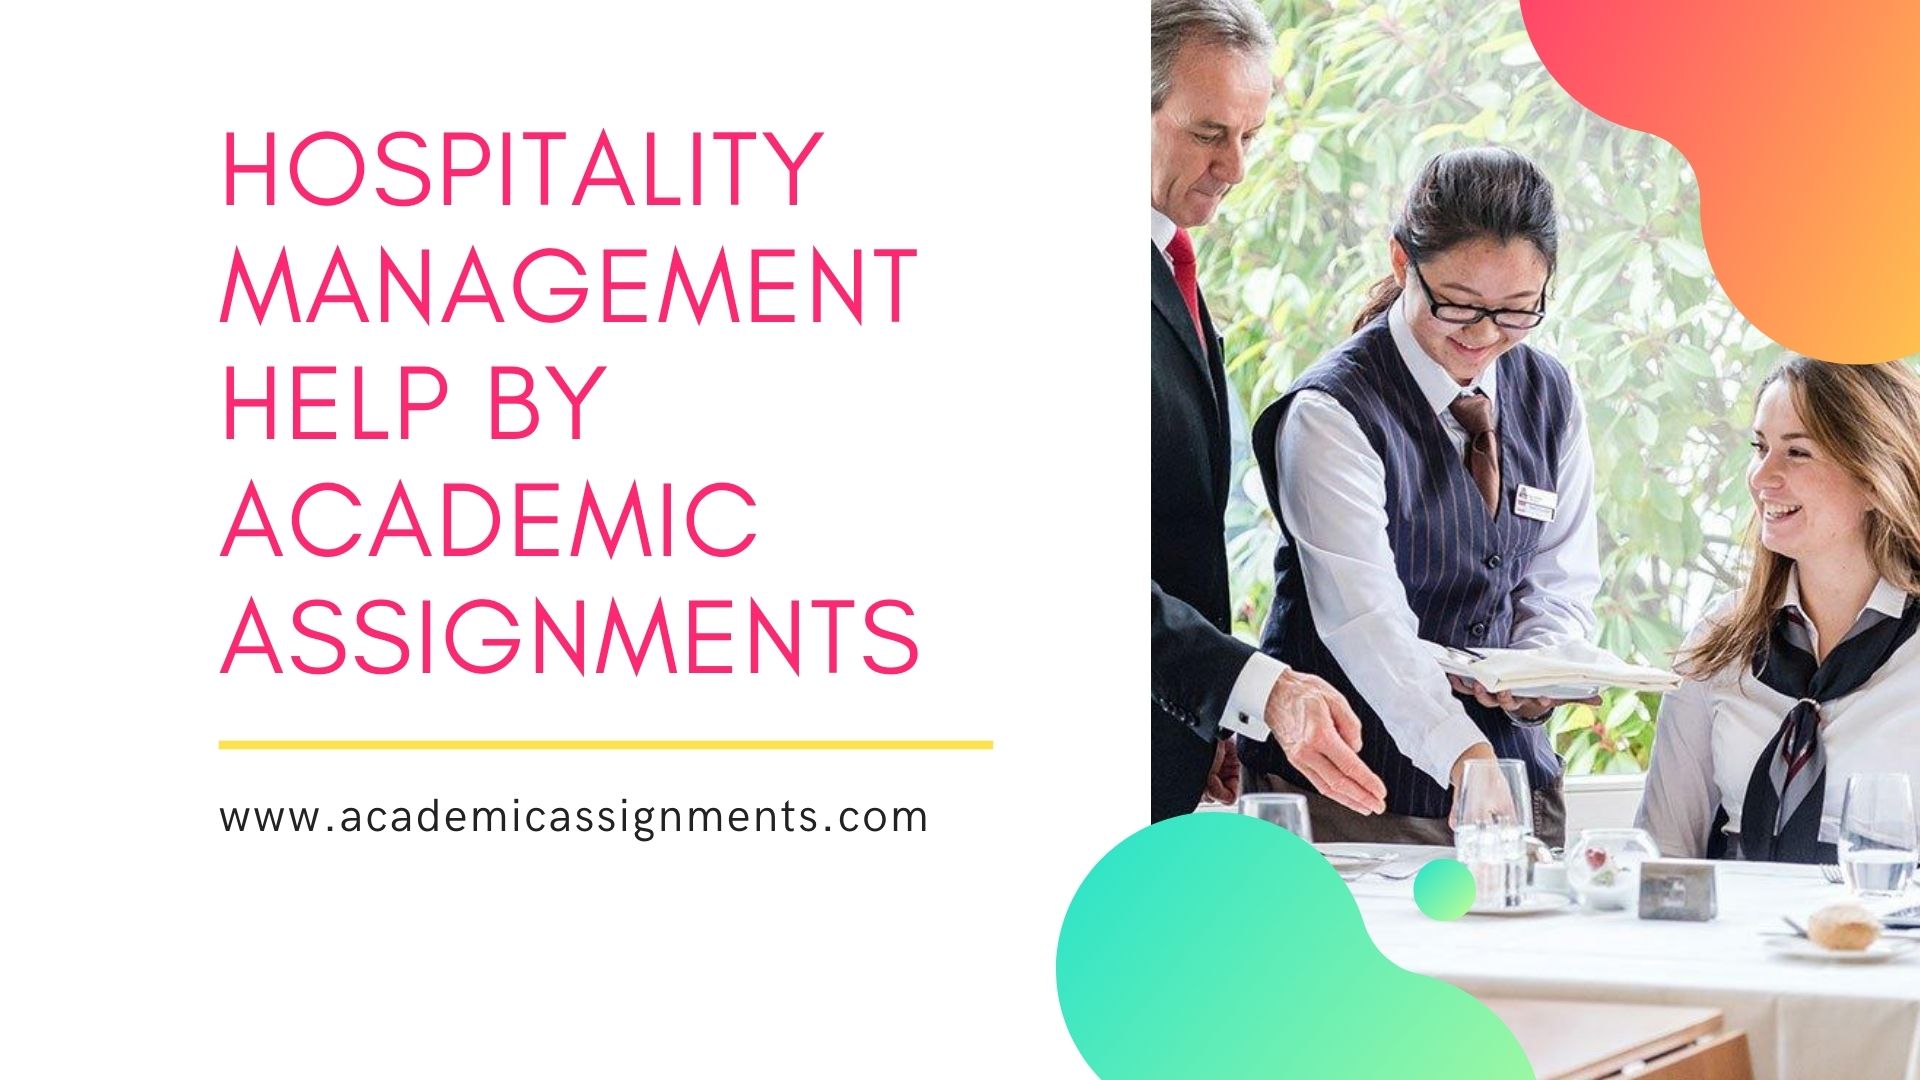 Hospitality management help by Academic Assignments